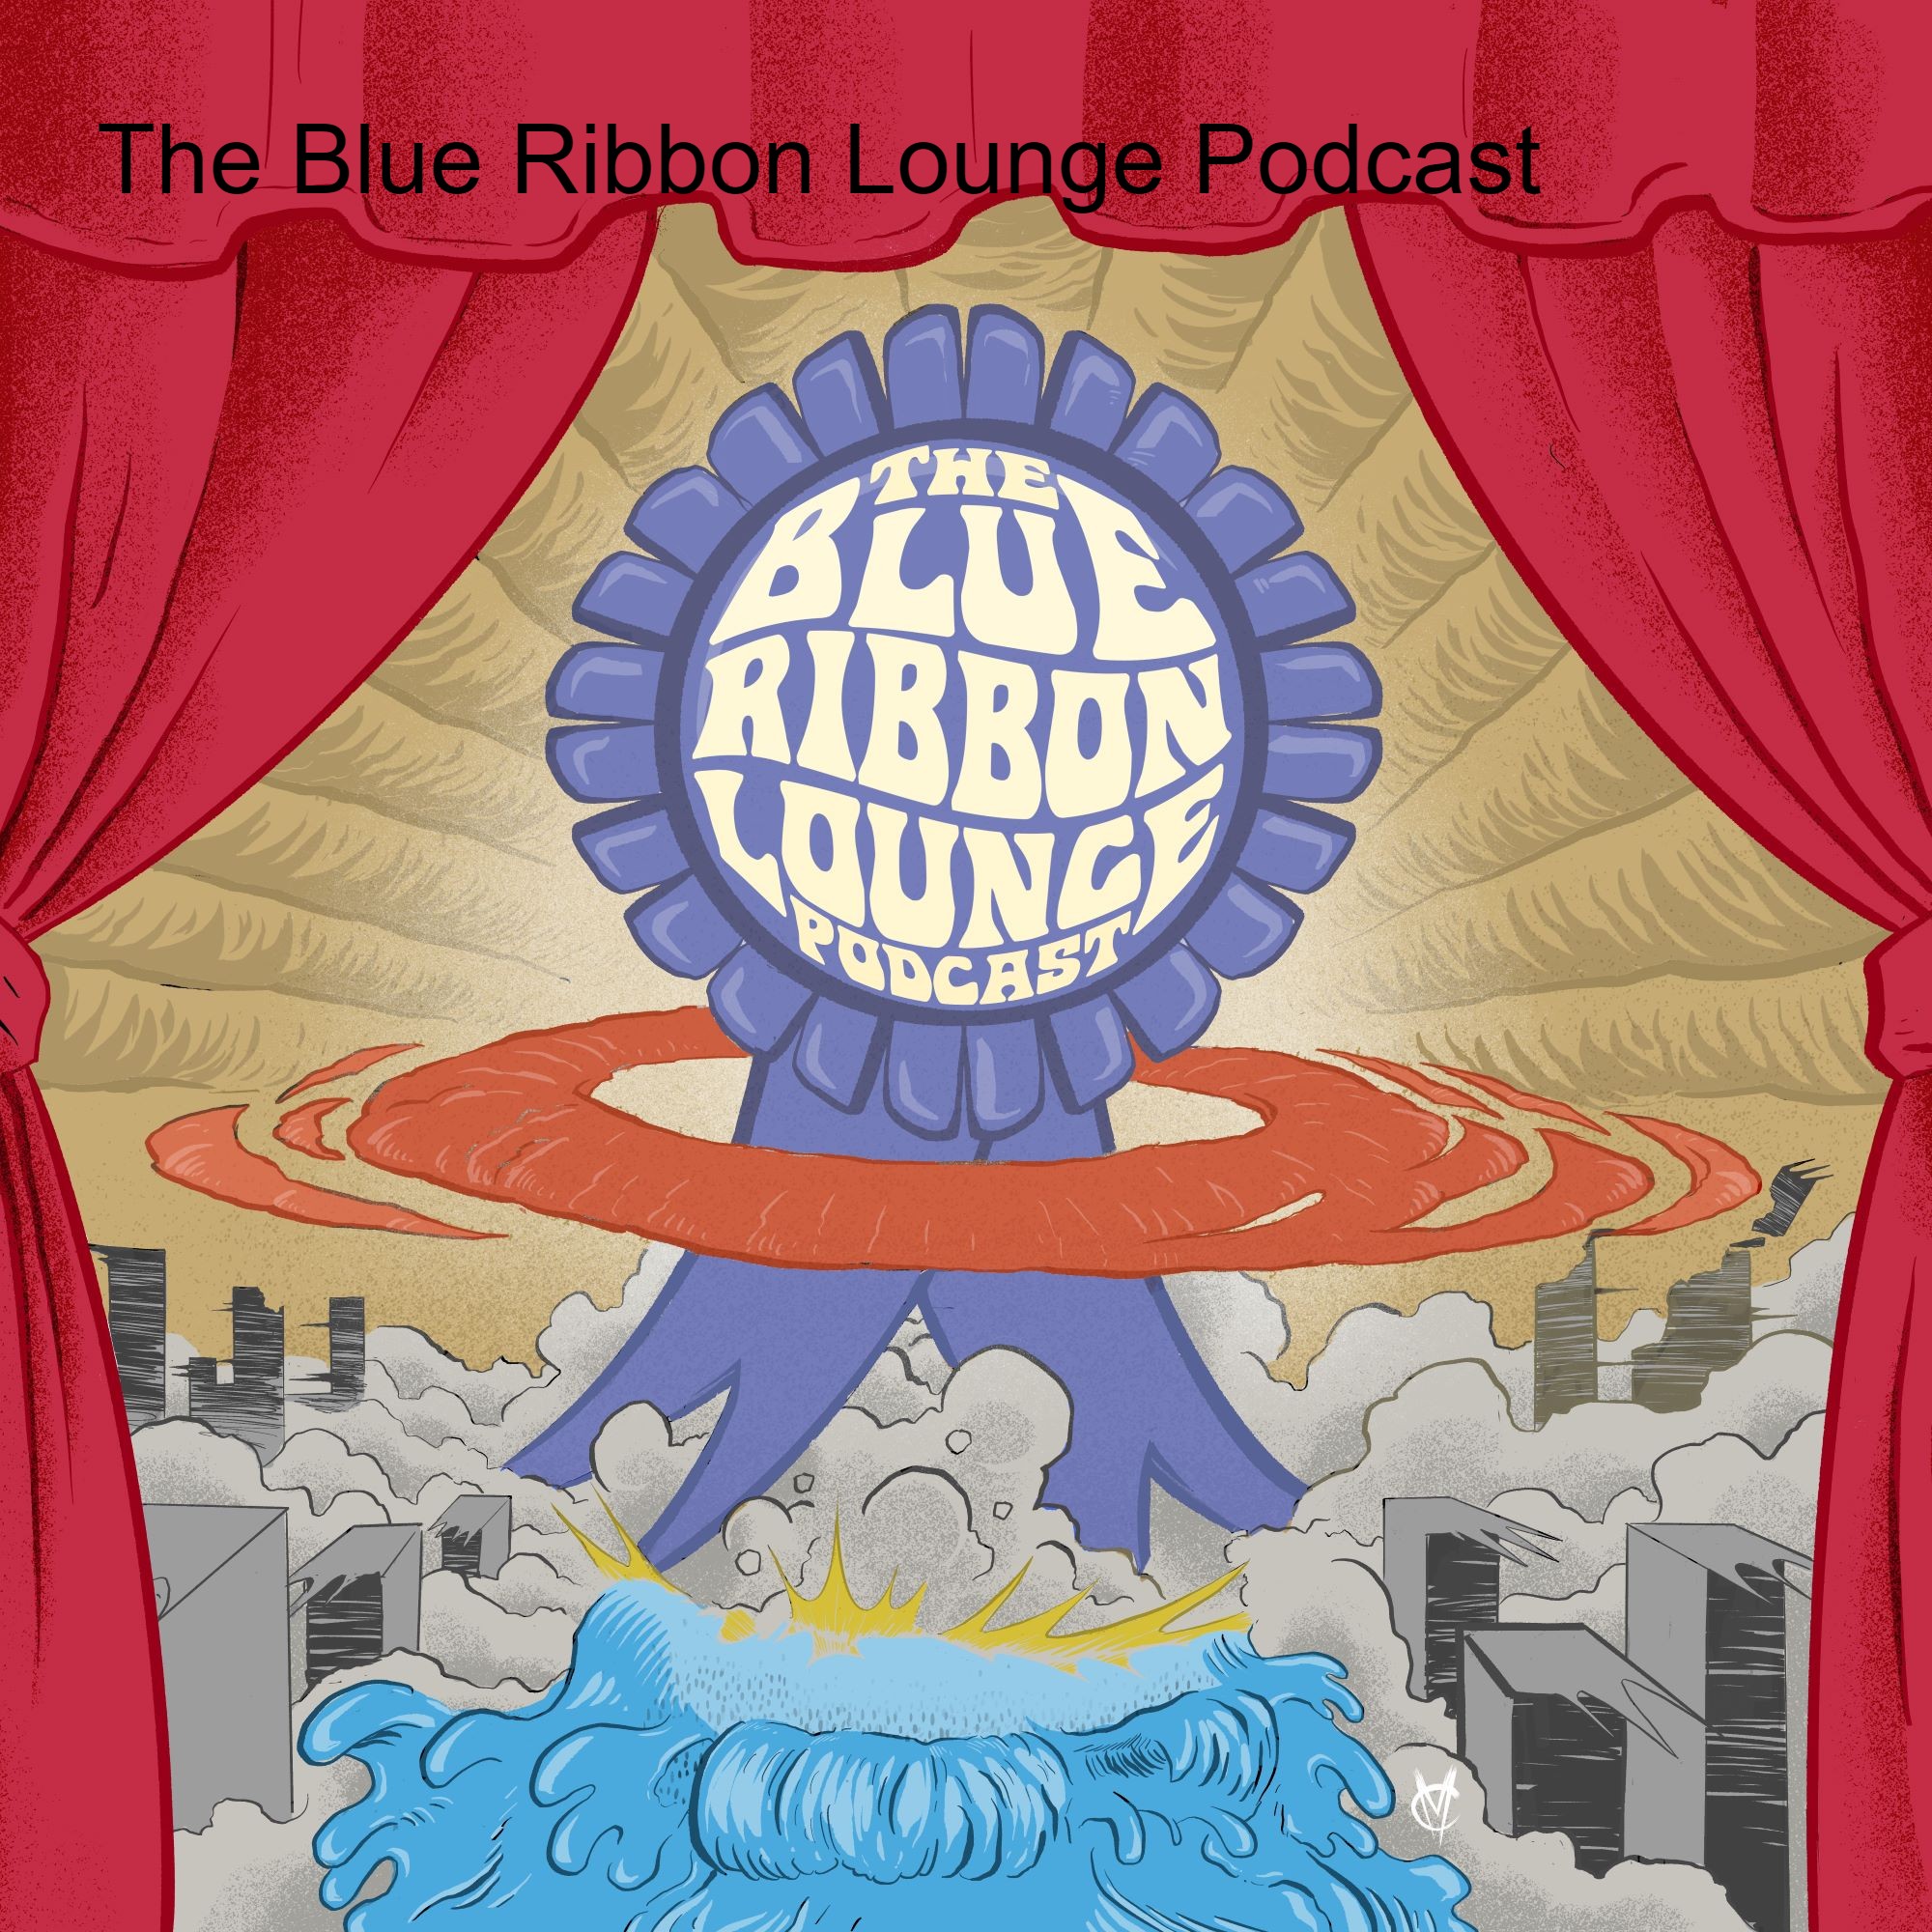 The Blue Ribbon Lounge Podcast